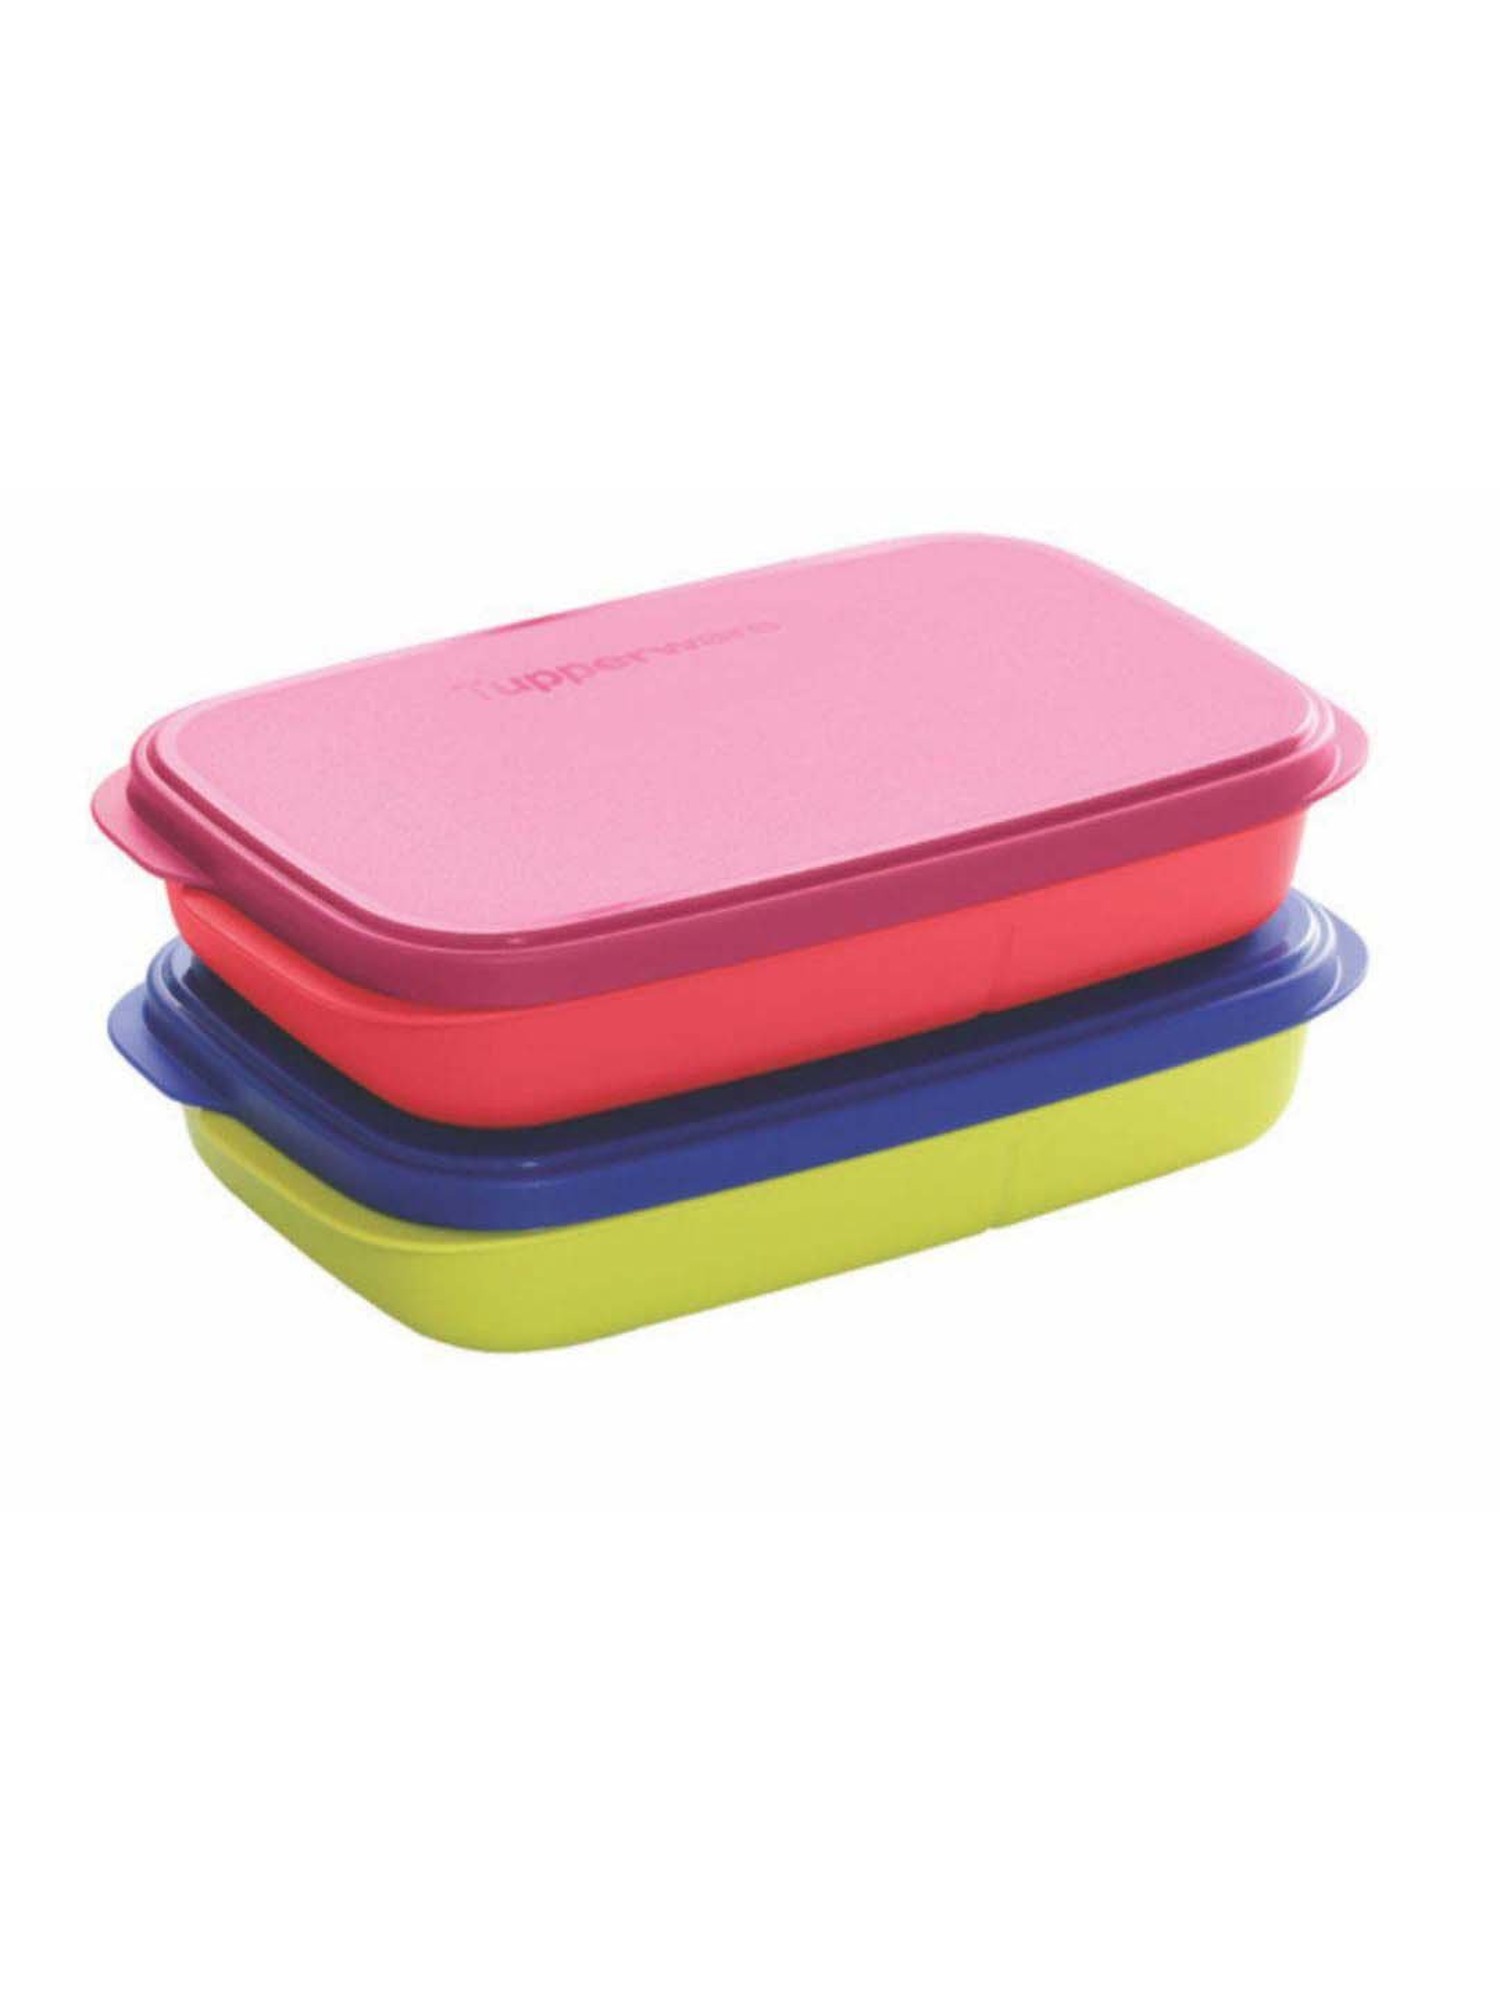 Buy Tupperware Urban Black Lunch Set with Carry Bag at Best Price @ Tata  CLiQ